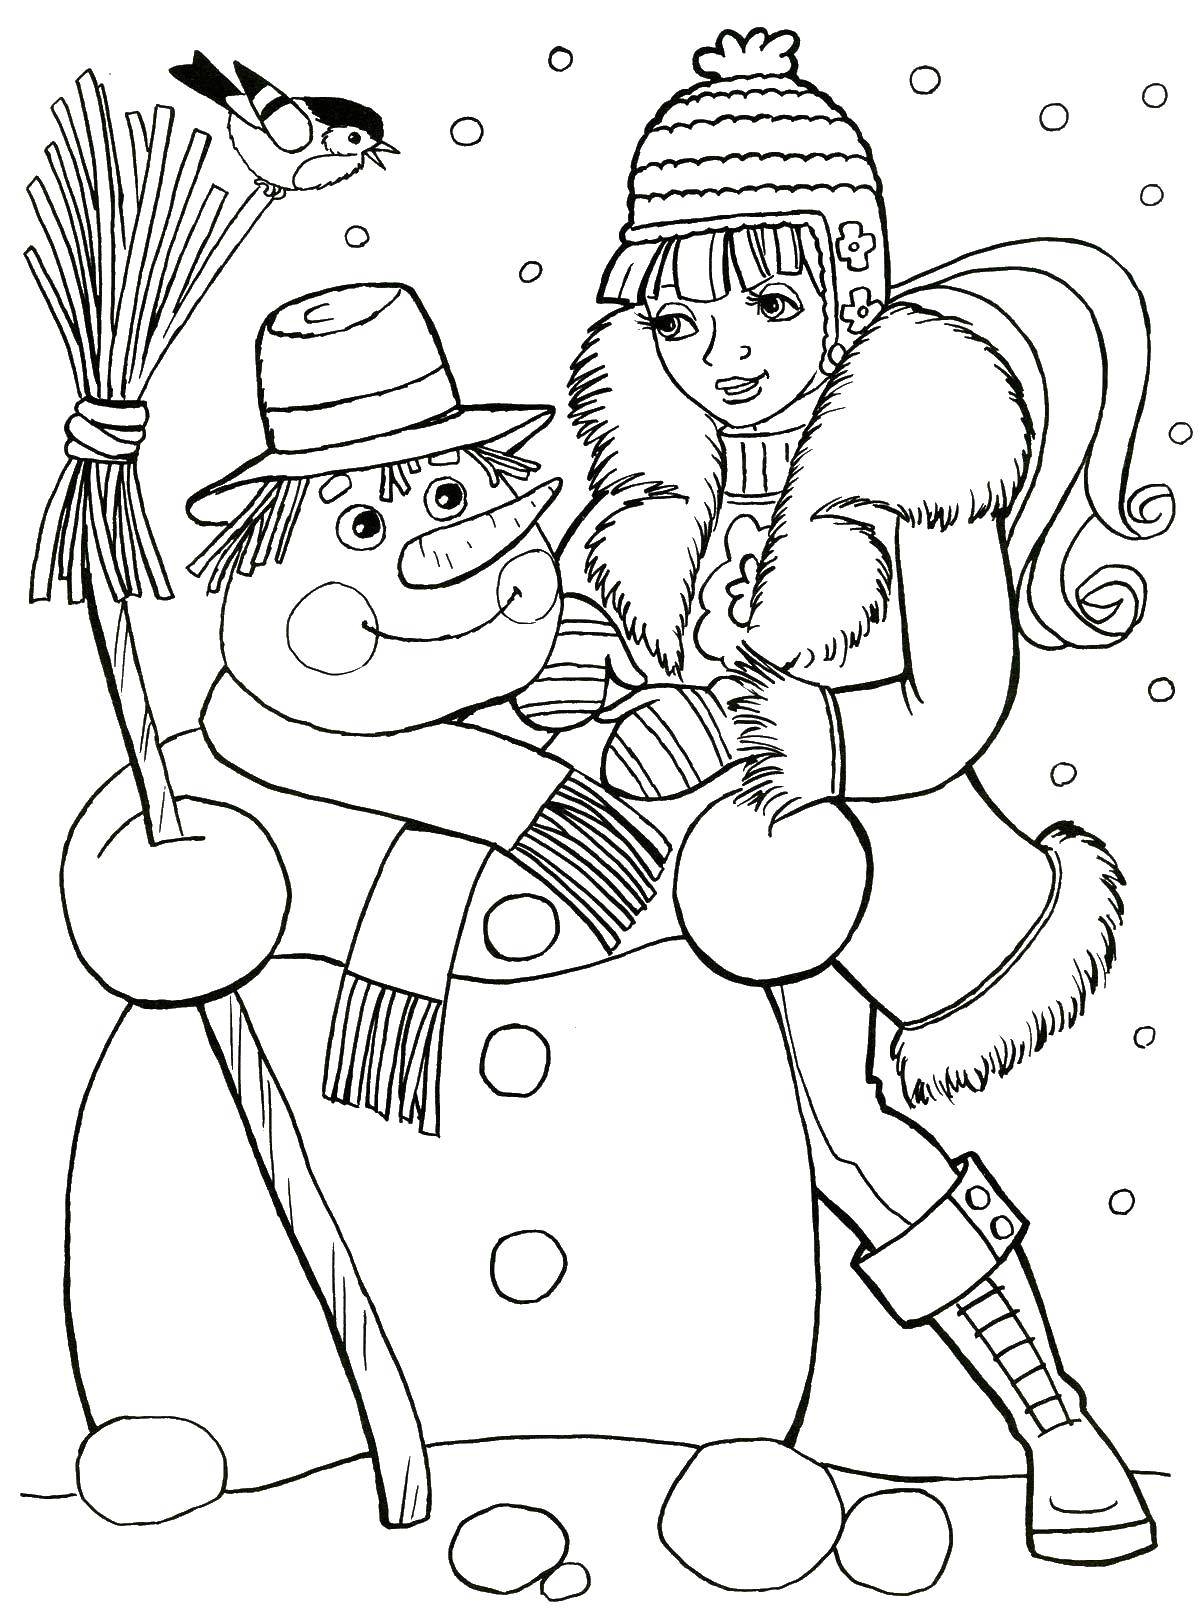 Coloring Snowman,girl. Category Coloring pages for kids. Tags:  snowman, broom, girl.